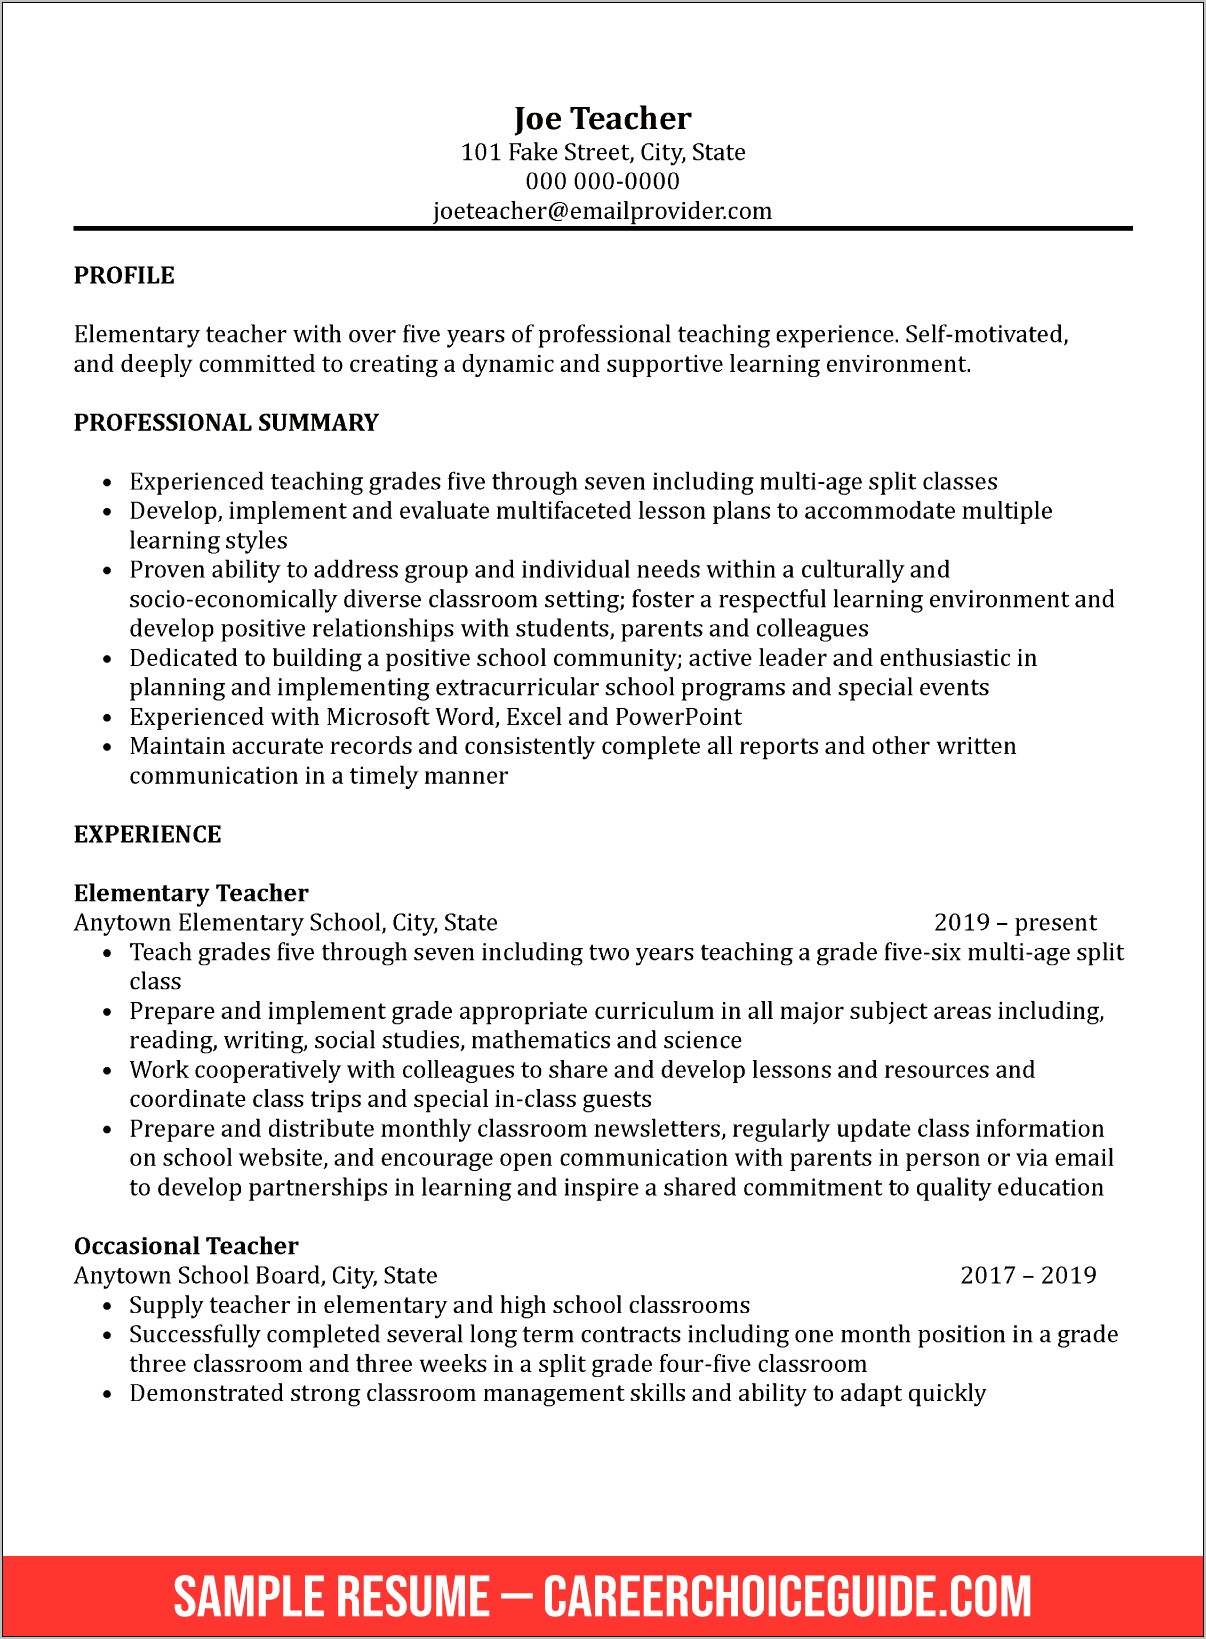 Resume Education Examples For Highschool Students